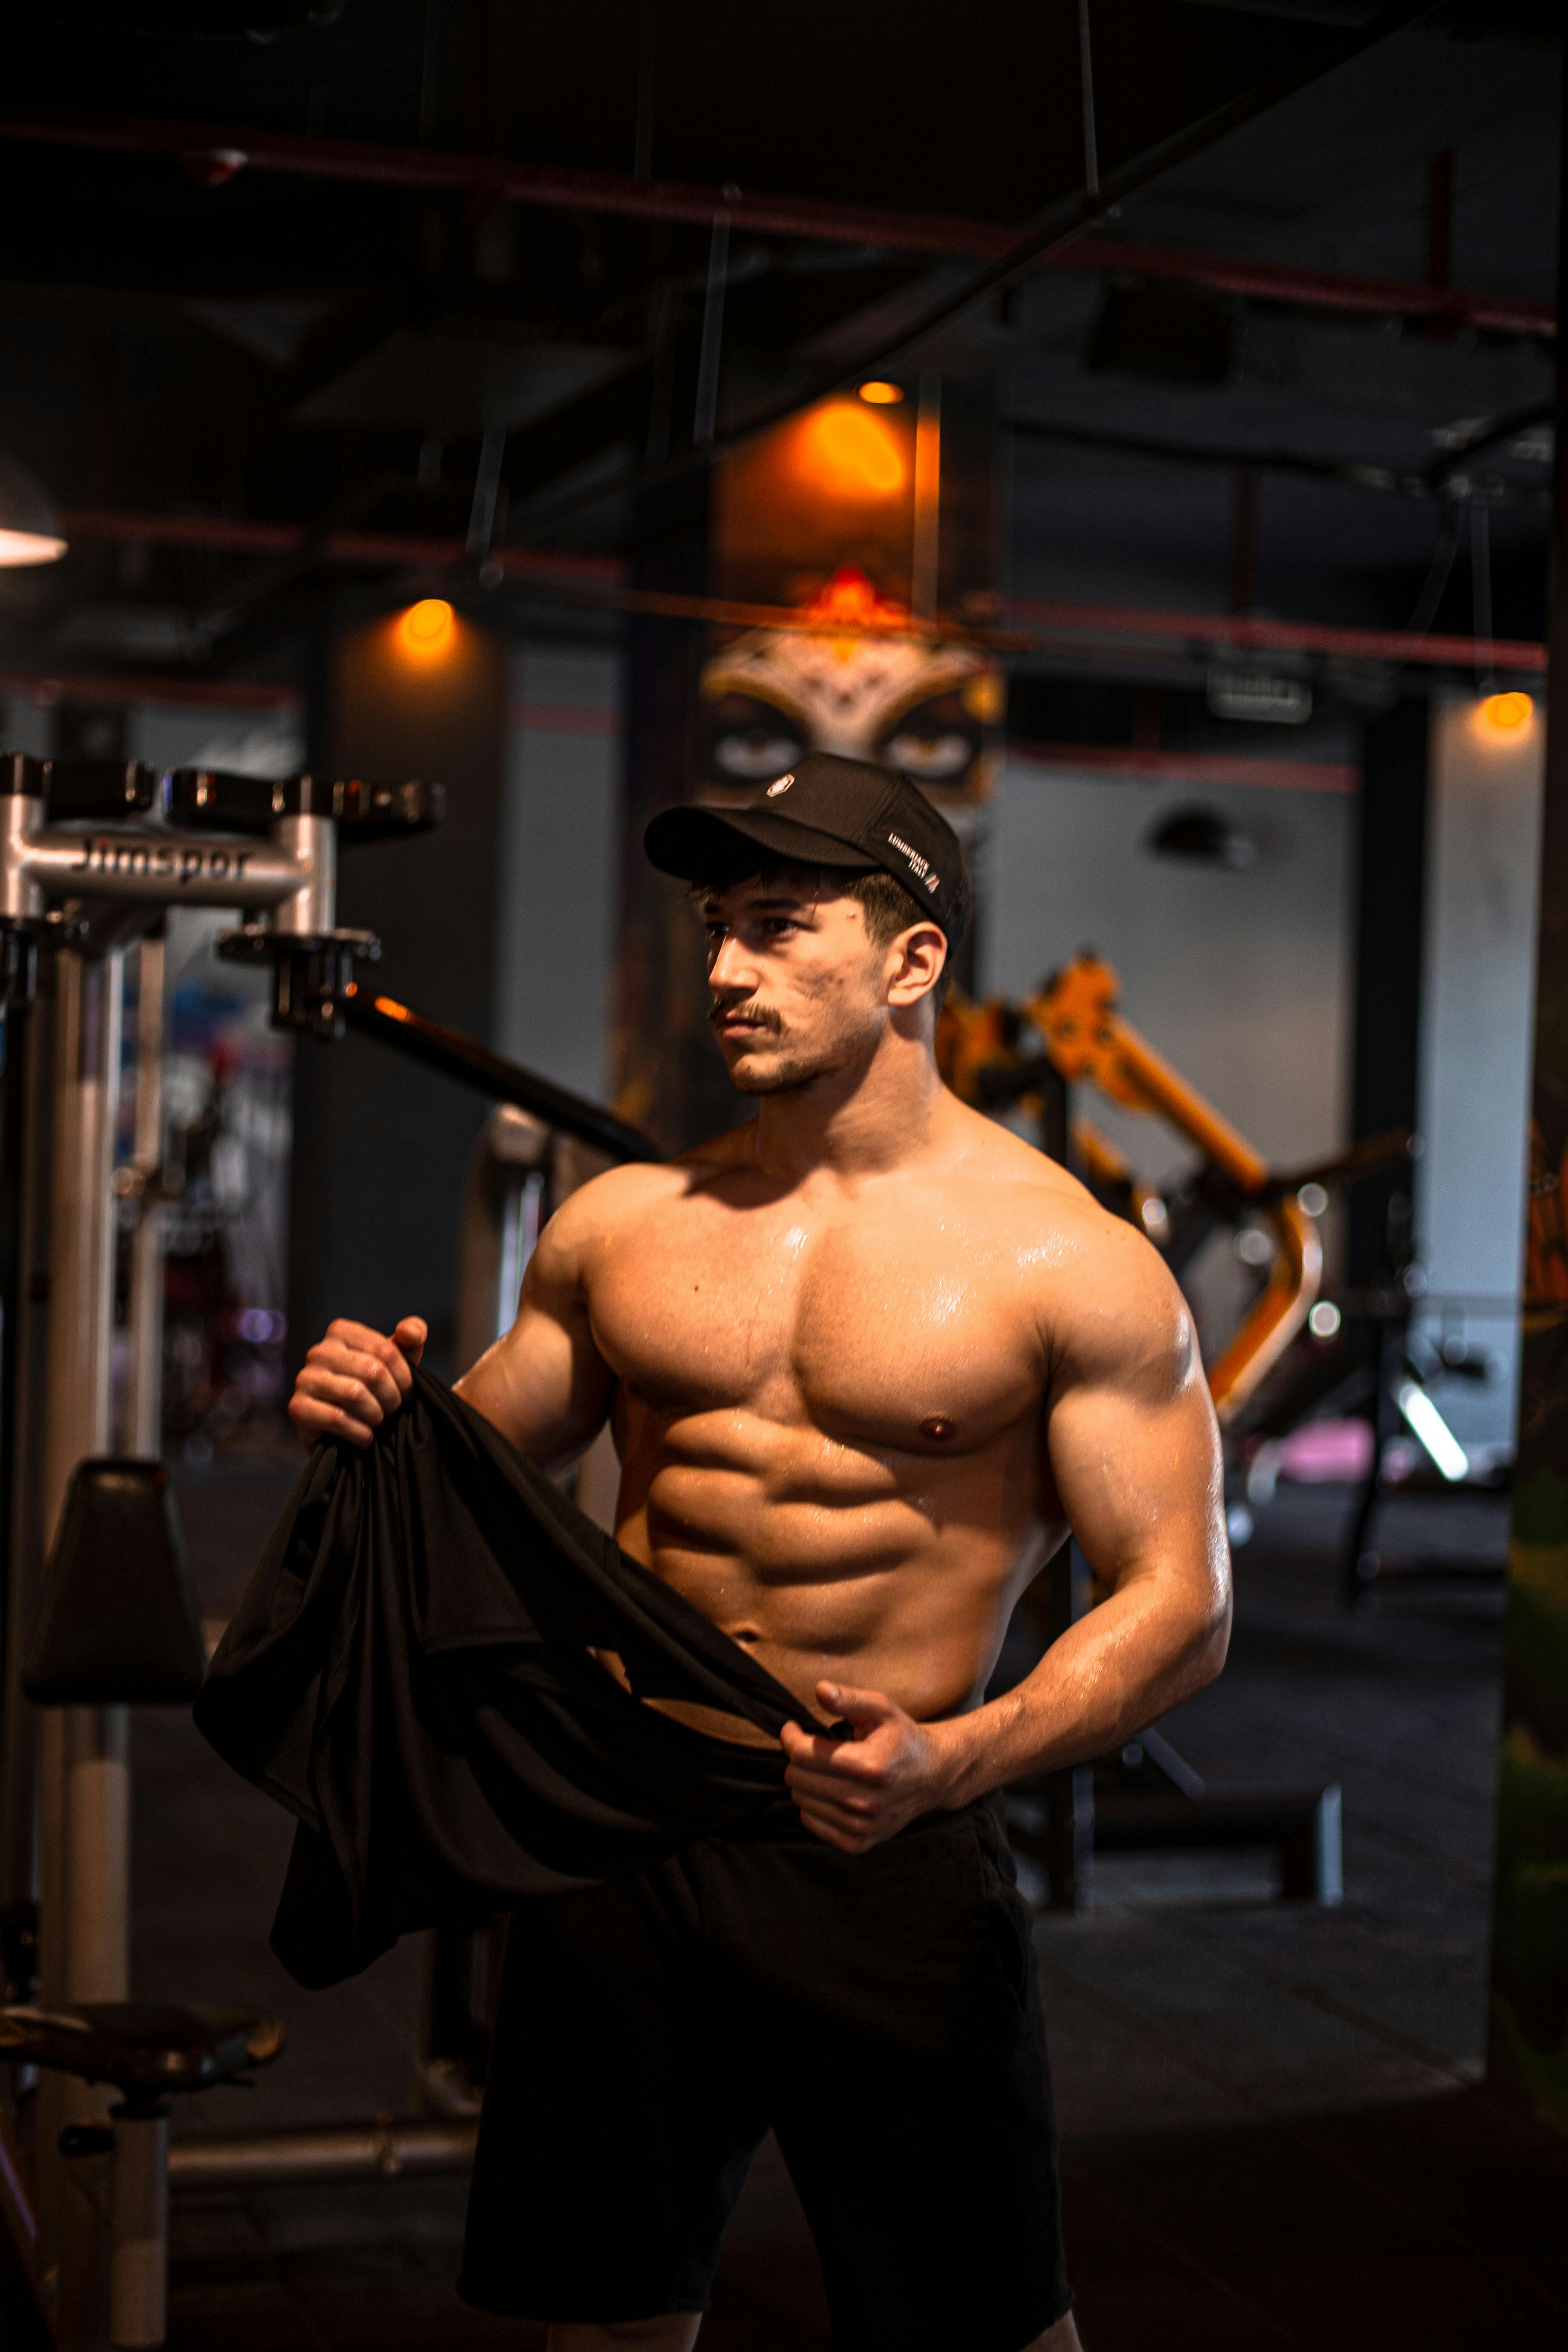 Muscular Athletic Bodybuilder Fitness Model Posing After Exercises In Gym  Stock Photo, Picture and Royalty Free Image. Image 88409621.